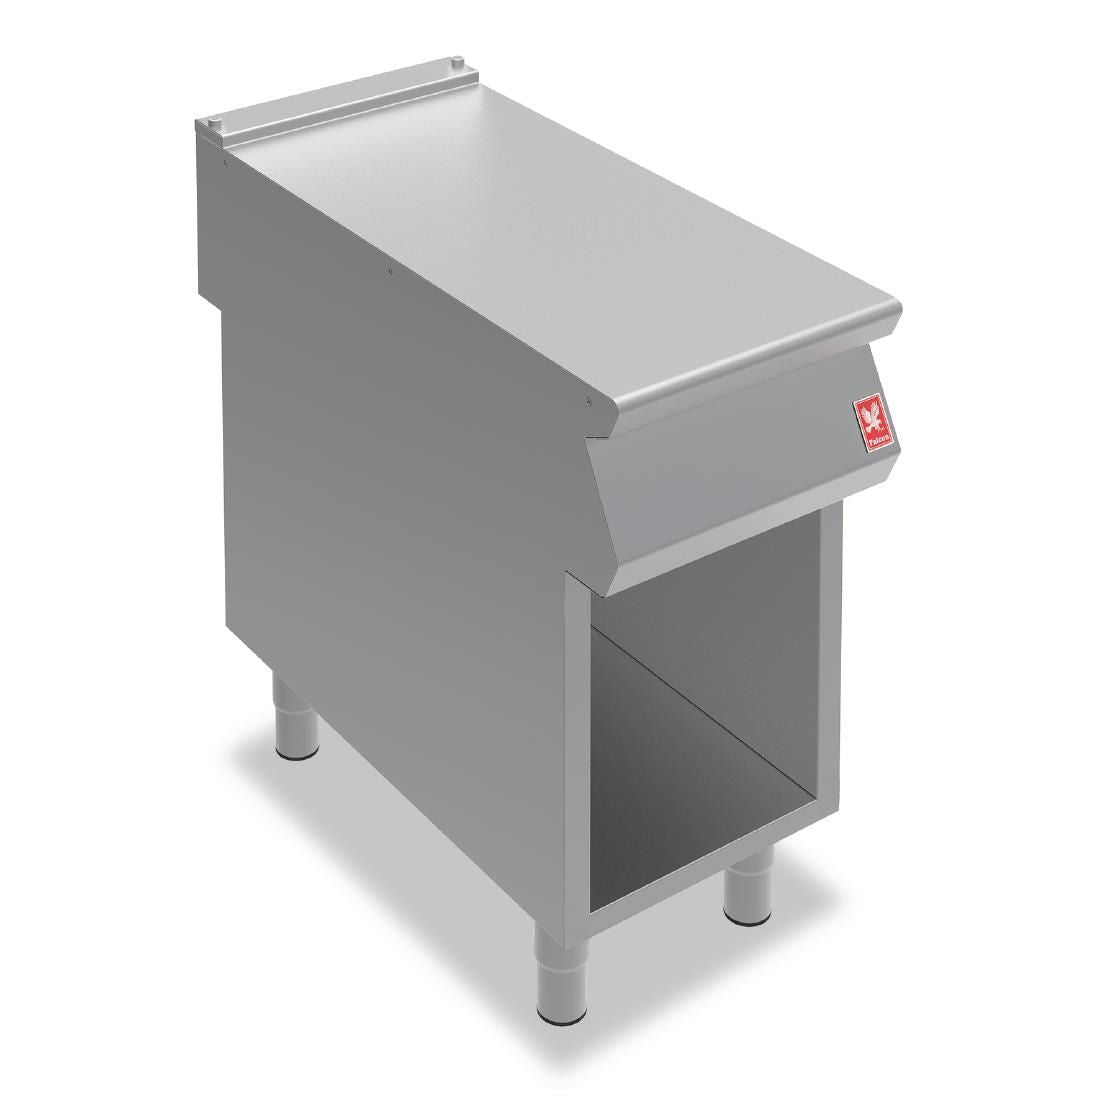 Falcon F900 Open Cabinet on Legs JD Catering Equipment Solutions Ltd